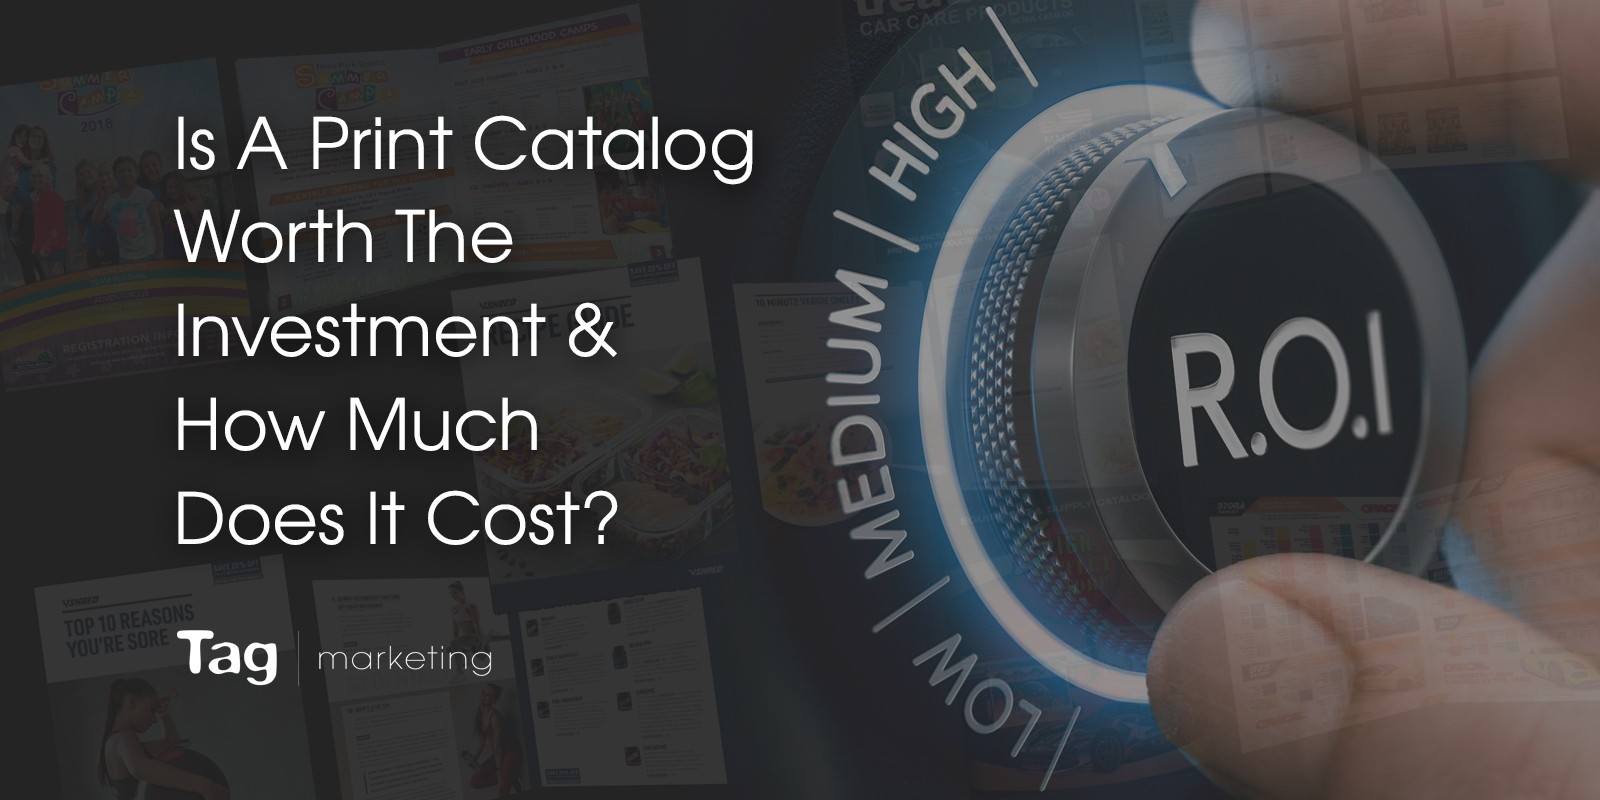 Is A Print Catalog Worth The Investment & How Much Does It Cost?